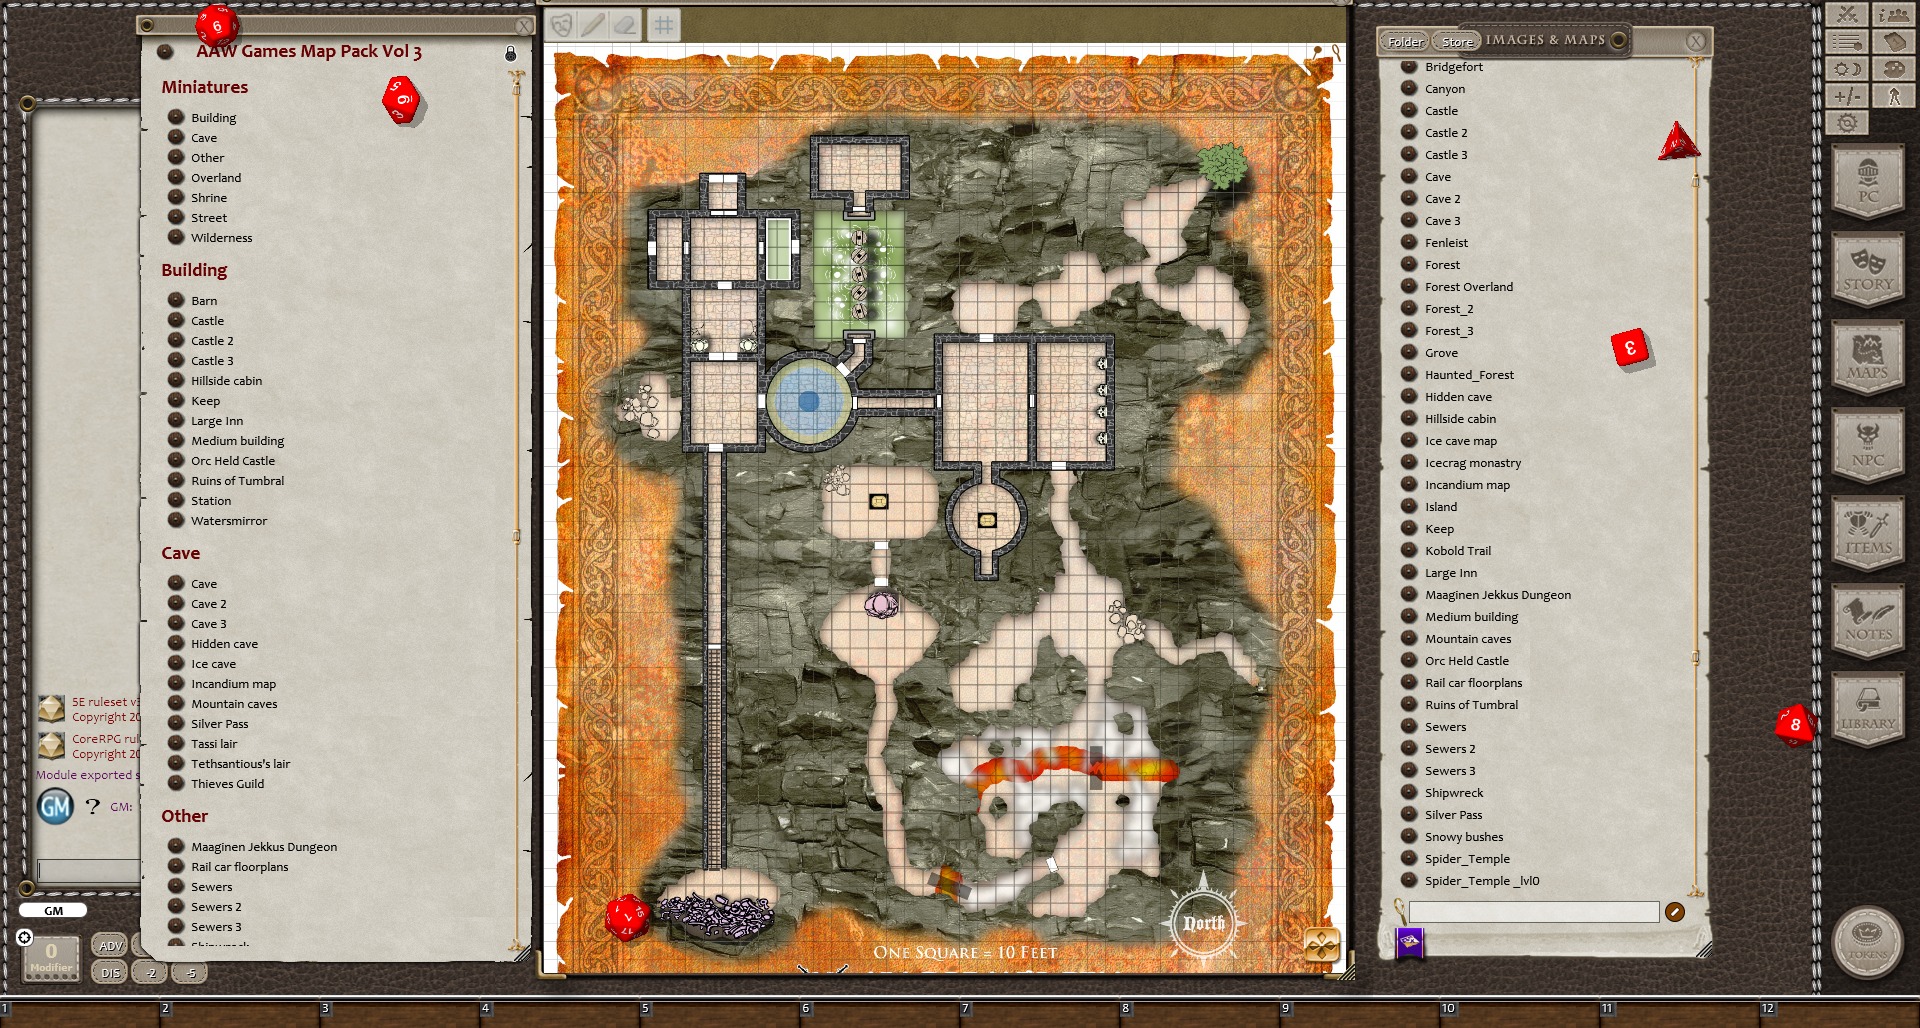 Fantasy Grounds - AAW Map Pack Vol 3 Featured Screenshot #1